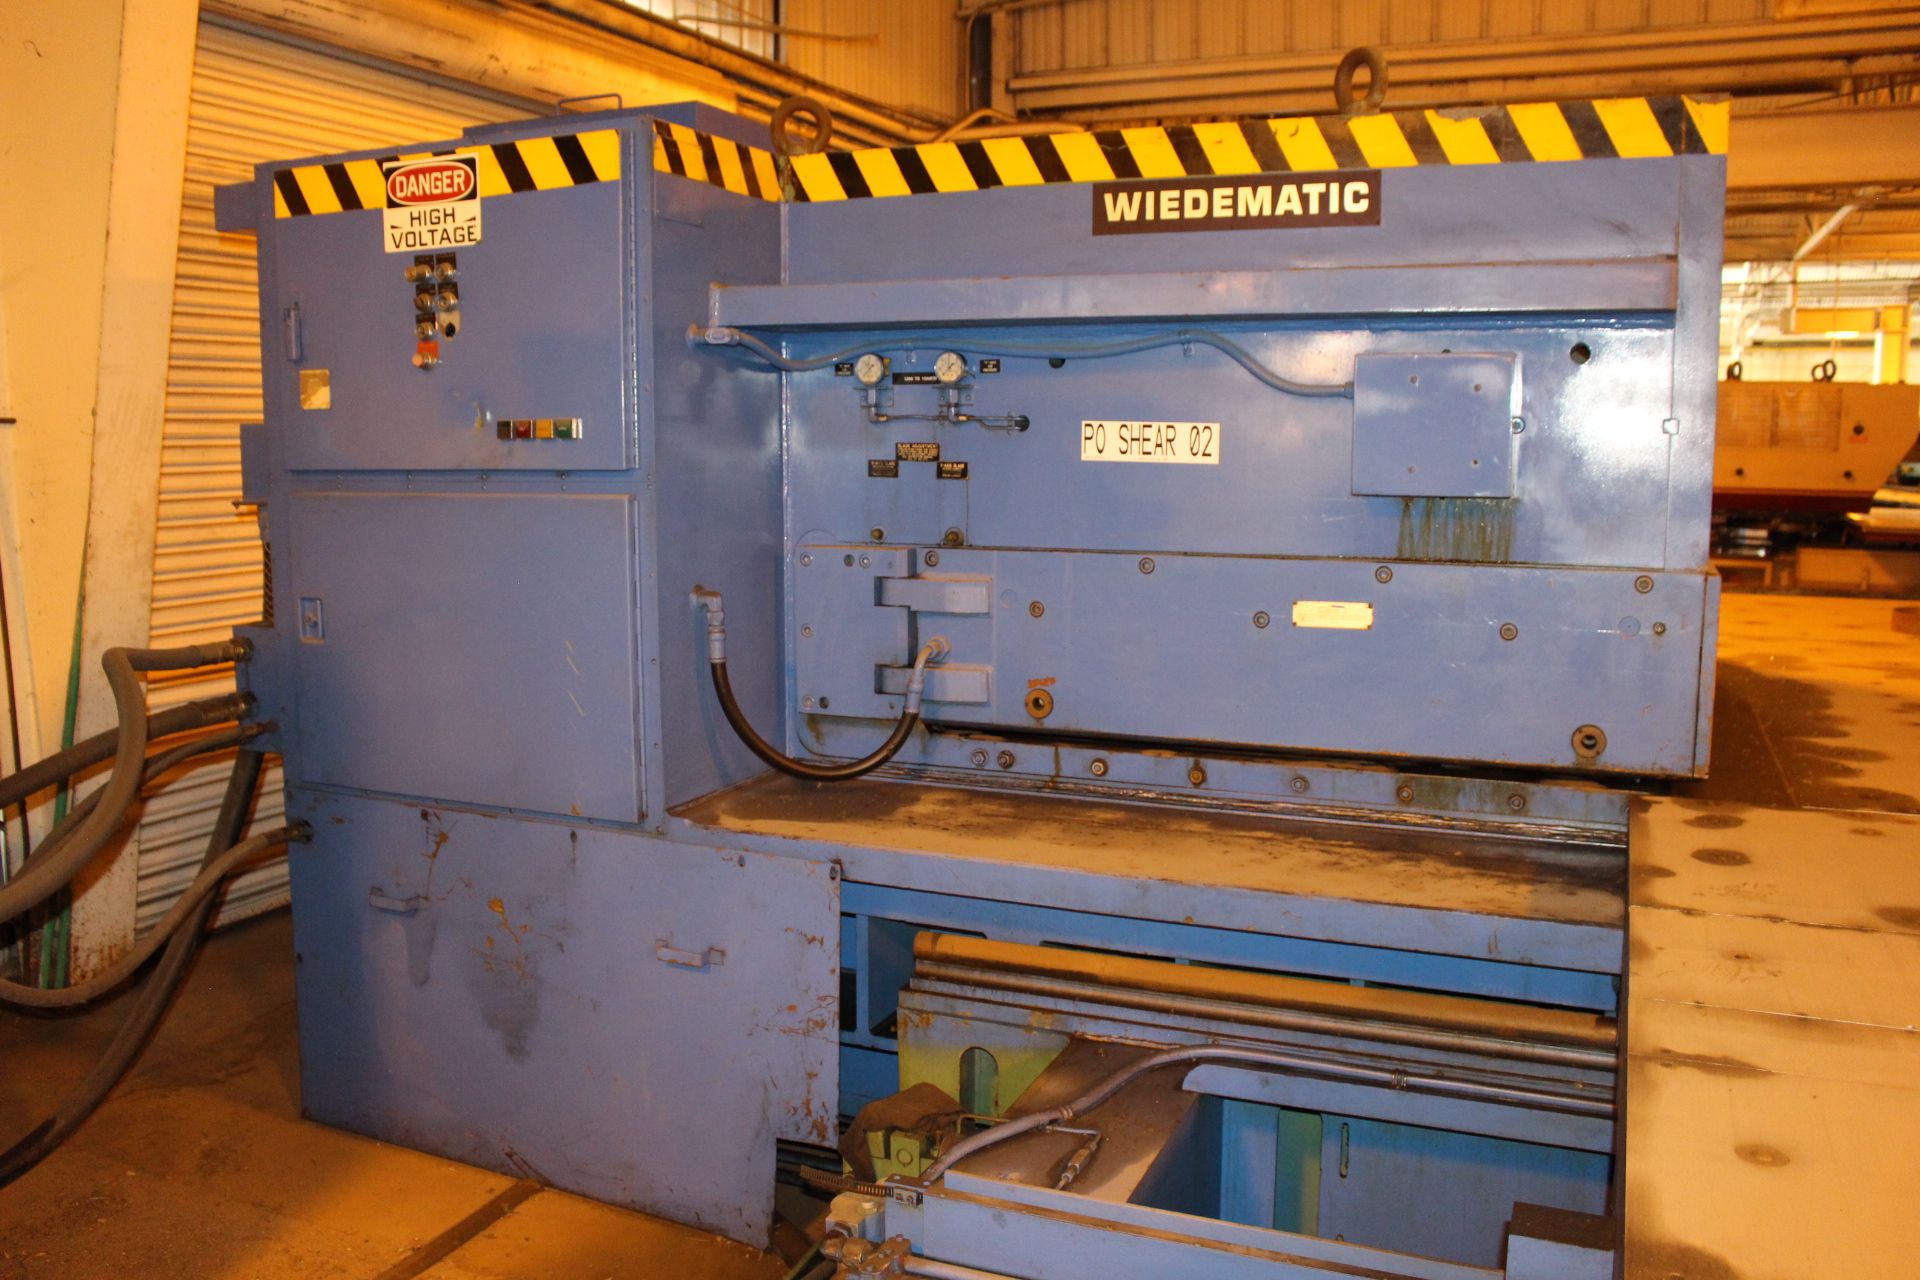 WIEDEMATIC OPTISHEAR, TYPE 412, S/N 199, W/ WARNER & SWASEY CONTROLS, OUT OF SERVICE - Image 3 of 6